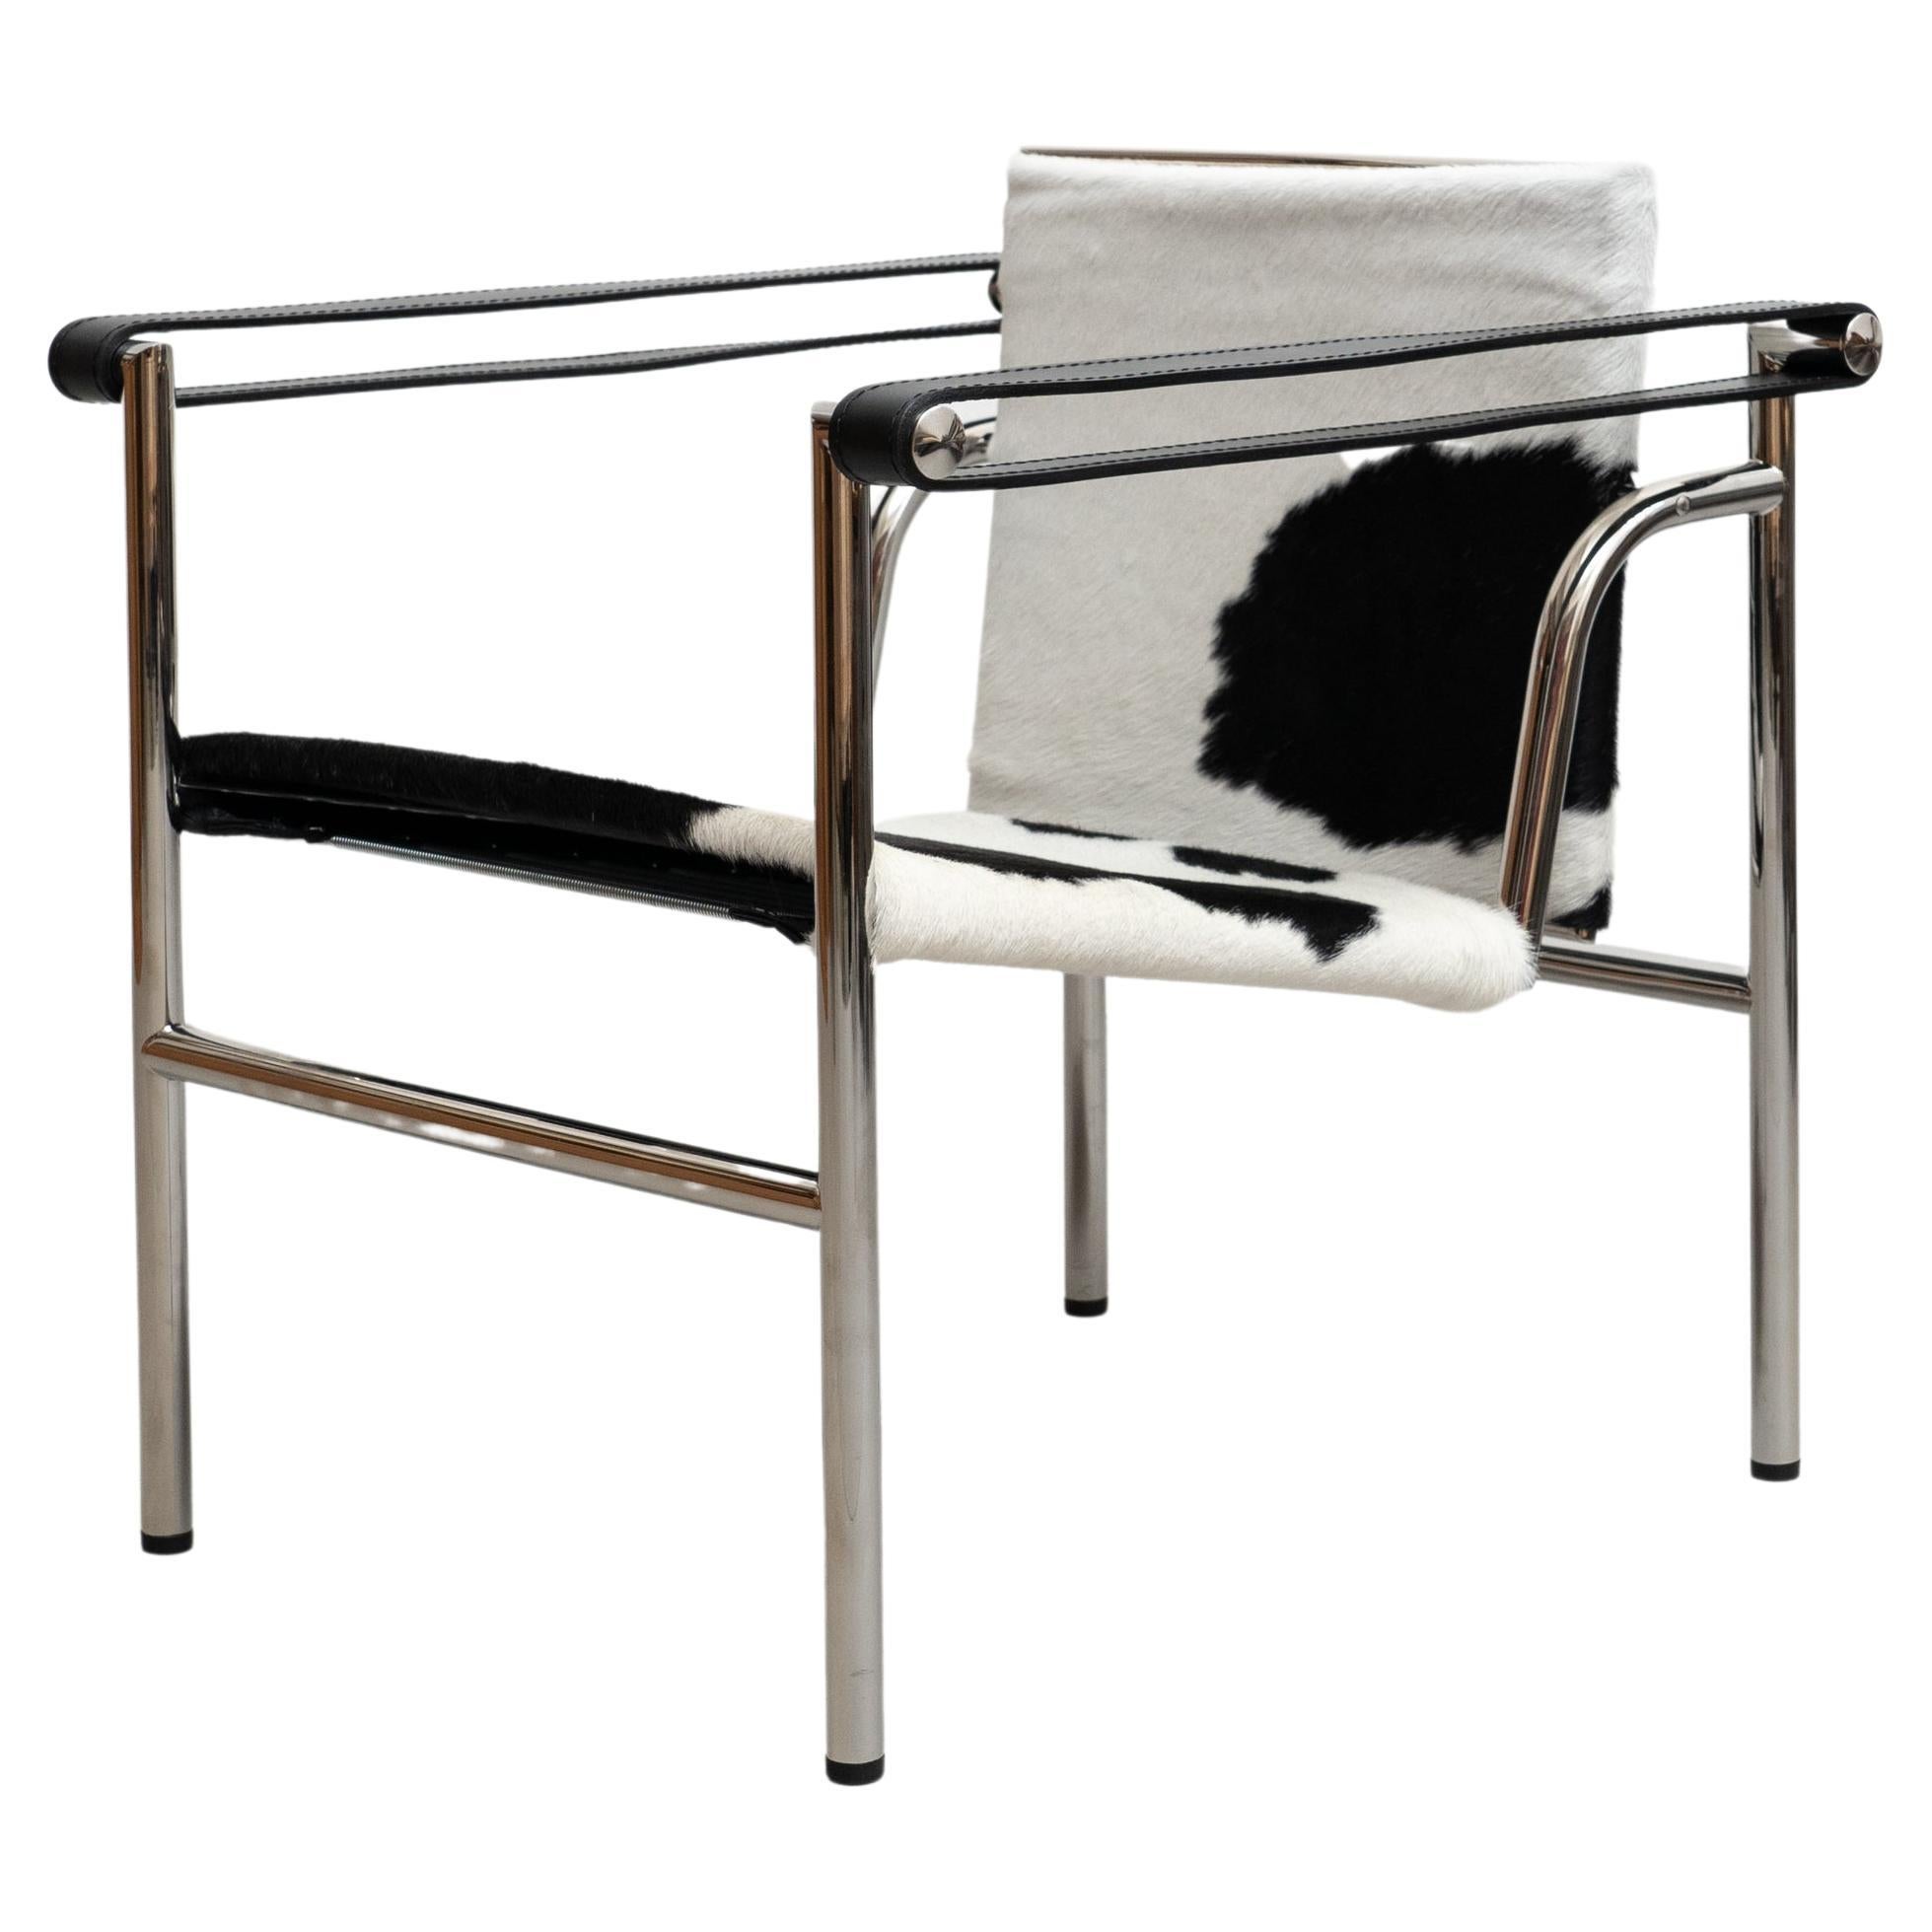 Le Corbusier, Pierre Jeanneret, Charlotte Perriand LC1 Chair by Cassina